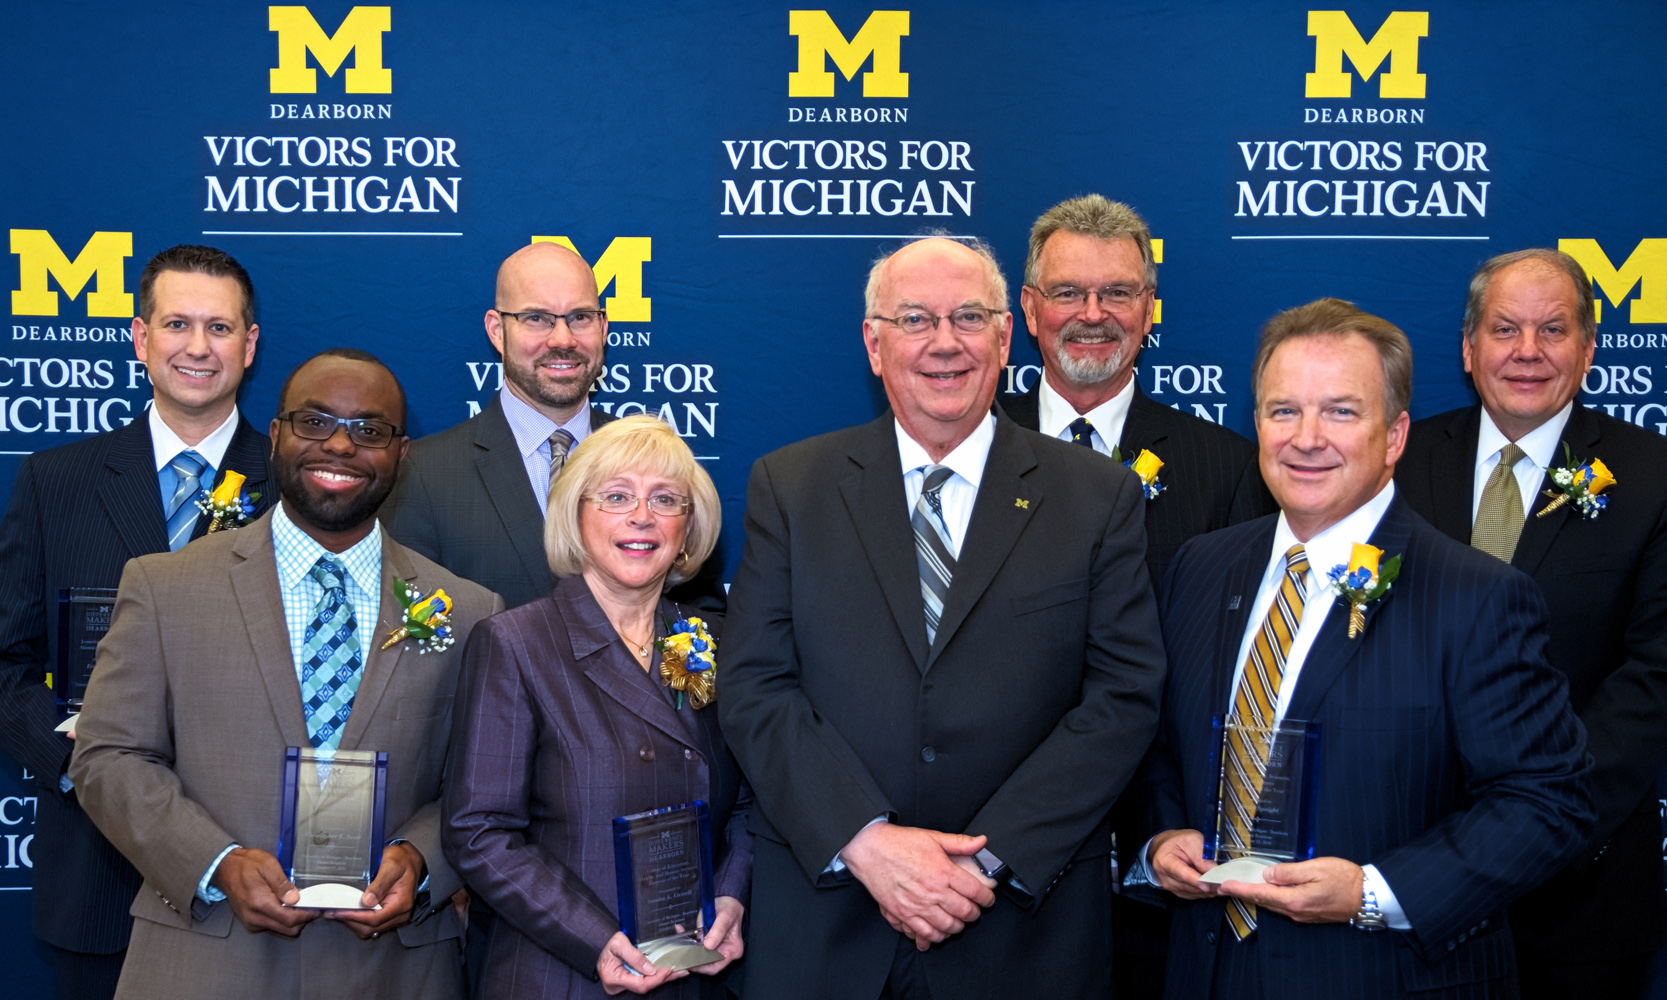 7 Alumni Difference Makers pose with the Chancellor in front of UM-Dearborn Victors for Michigan banner.